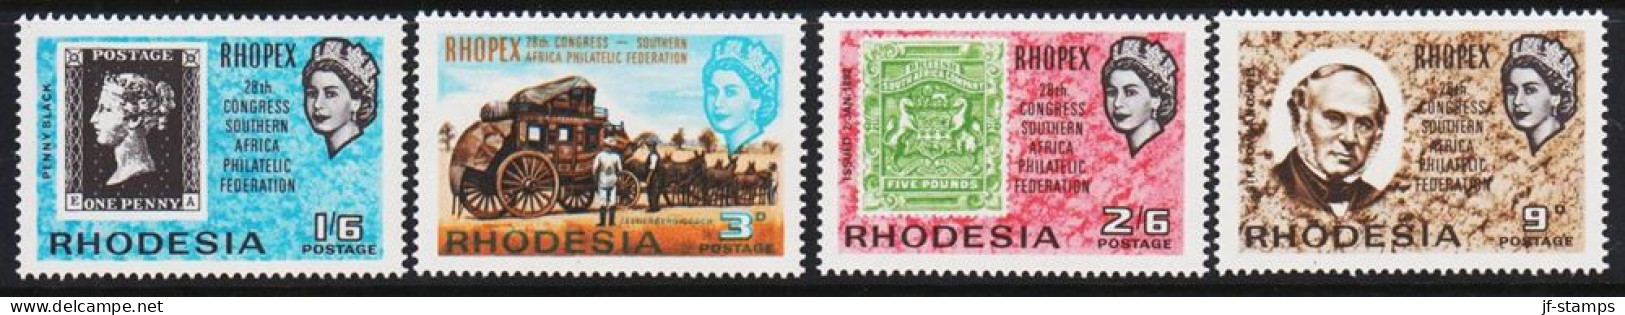 1966. RHODESIA. RHOPEX. Complete Set With 4 Stamps Never Hinged.  (Michel 38-41) - JF545281 - Rhodesia (1964-1980)